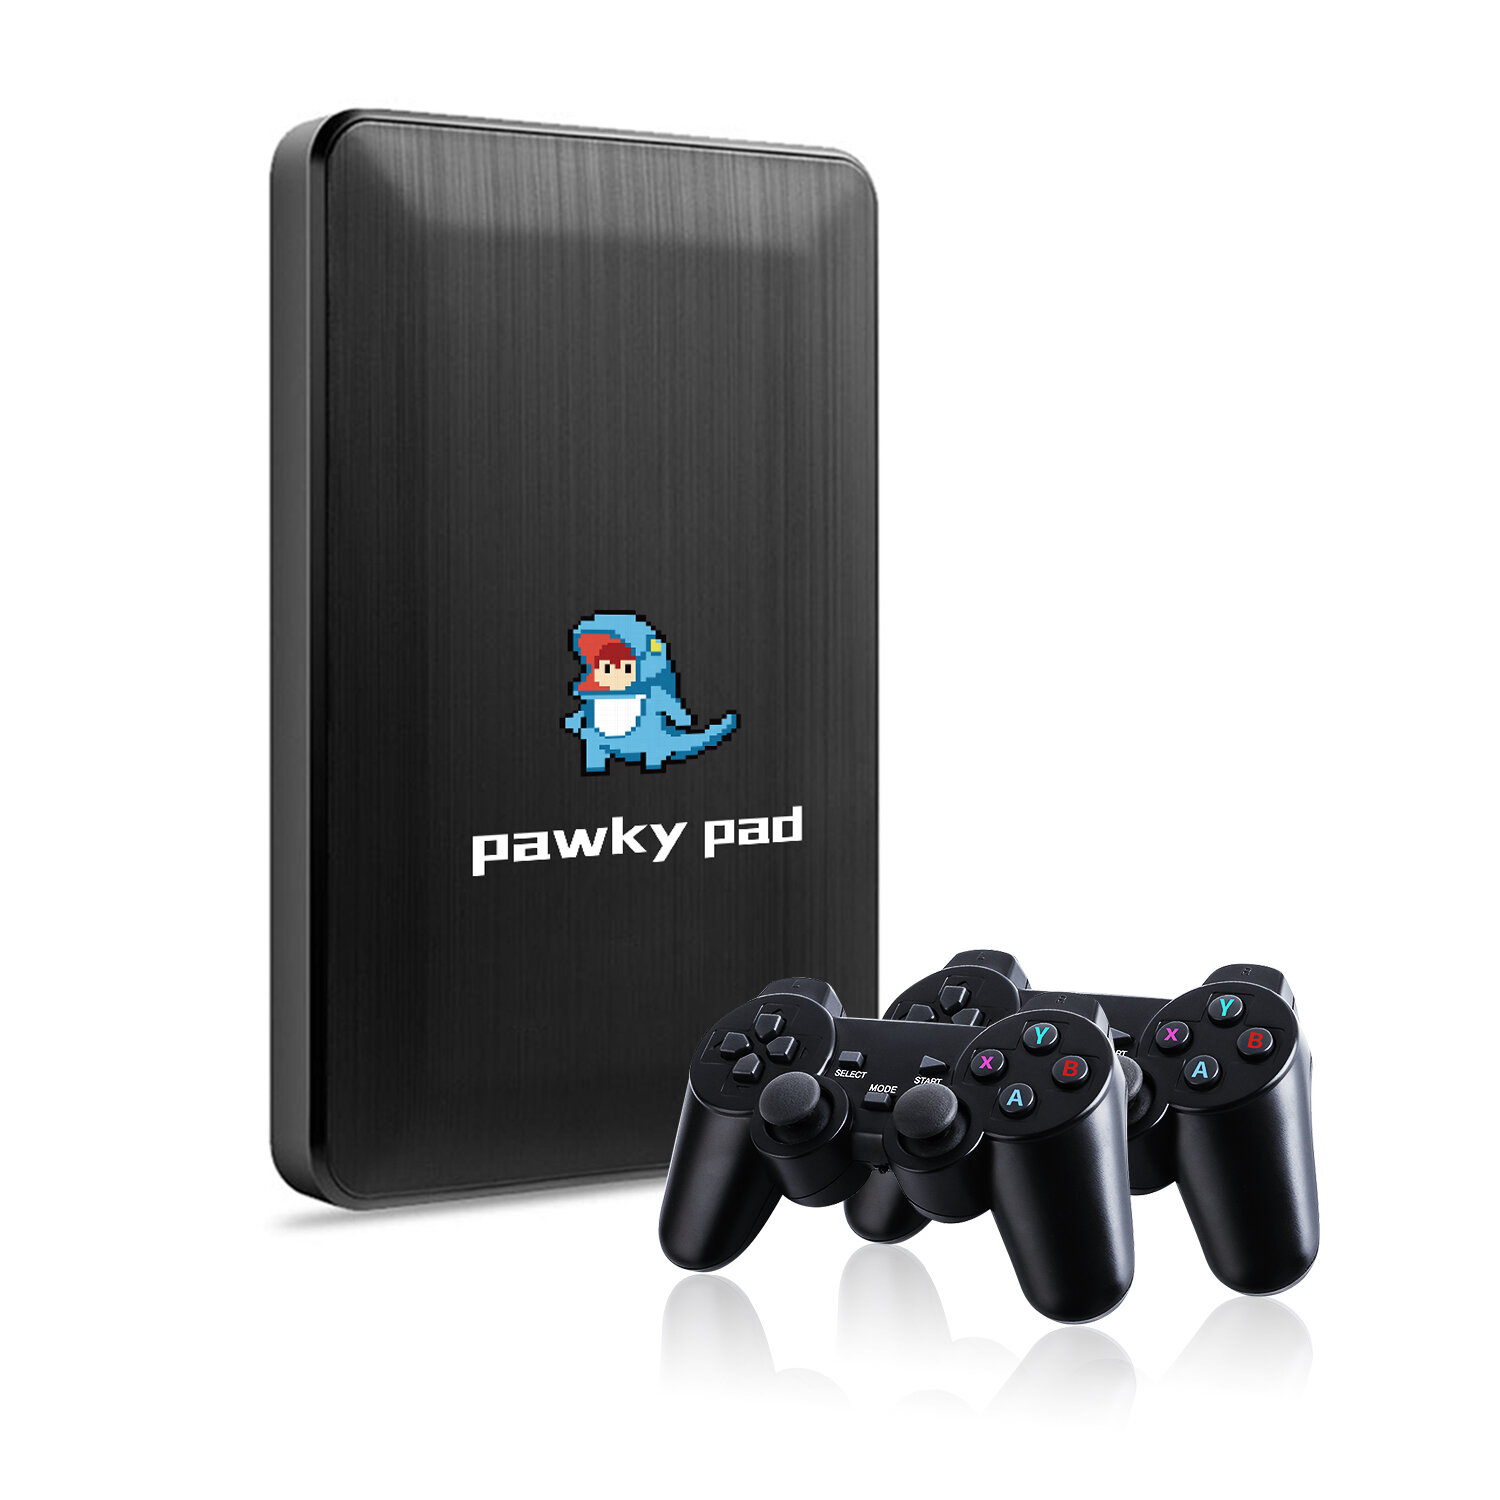 Pawky Pad 2T 4K HD Game Box 60000 Games 3D Mini Video TV Game Console Hard Disk Saturn GC PS2 Naomi 